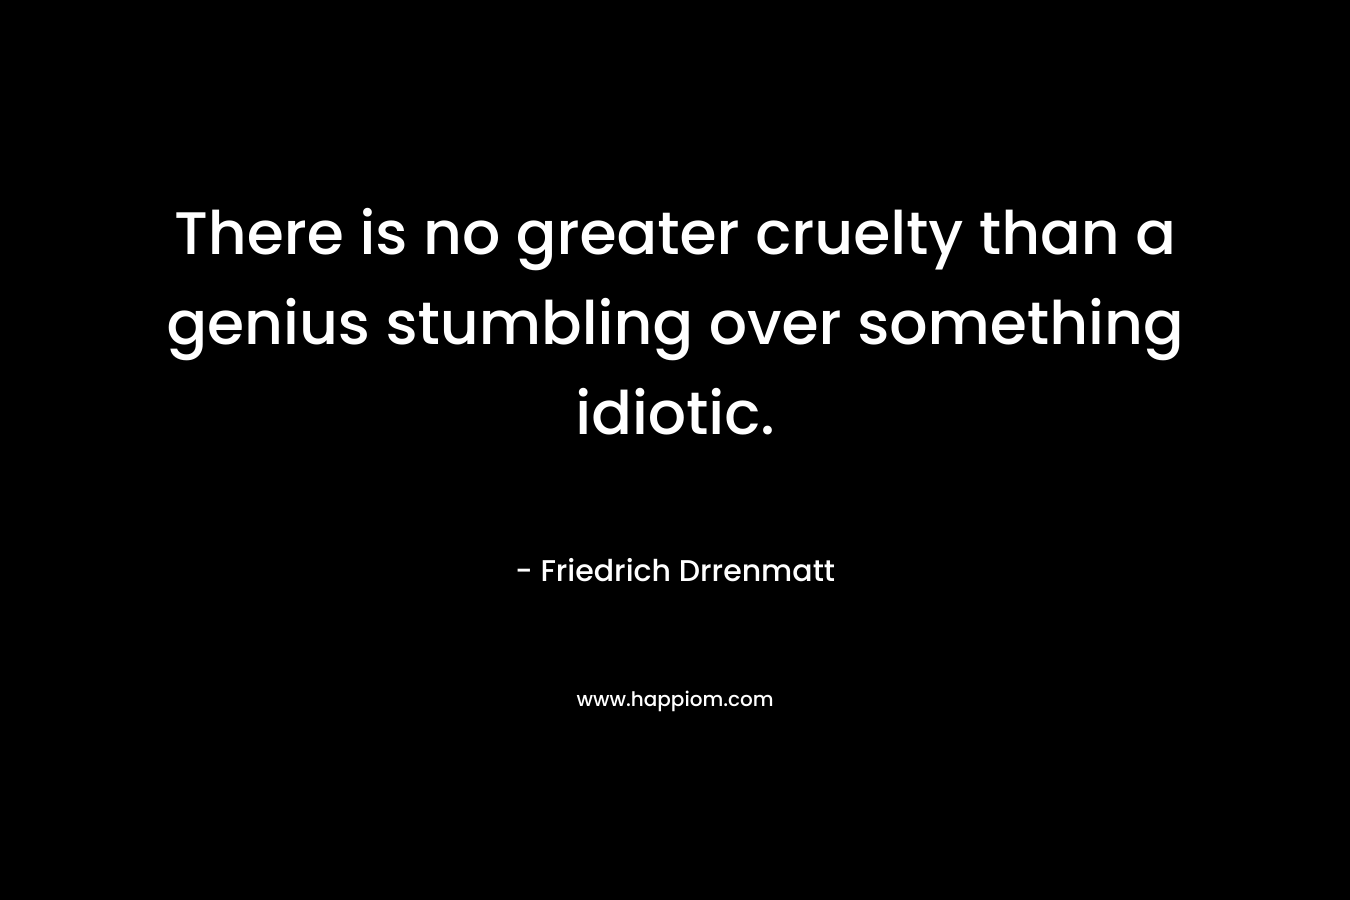 There is no greater cruelty than a genius stumbling over something idiotic. – Friedrich Drrenmatt